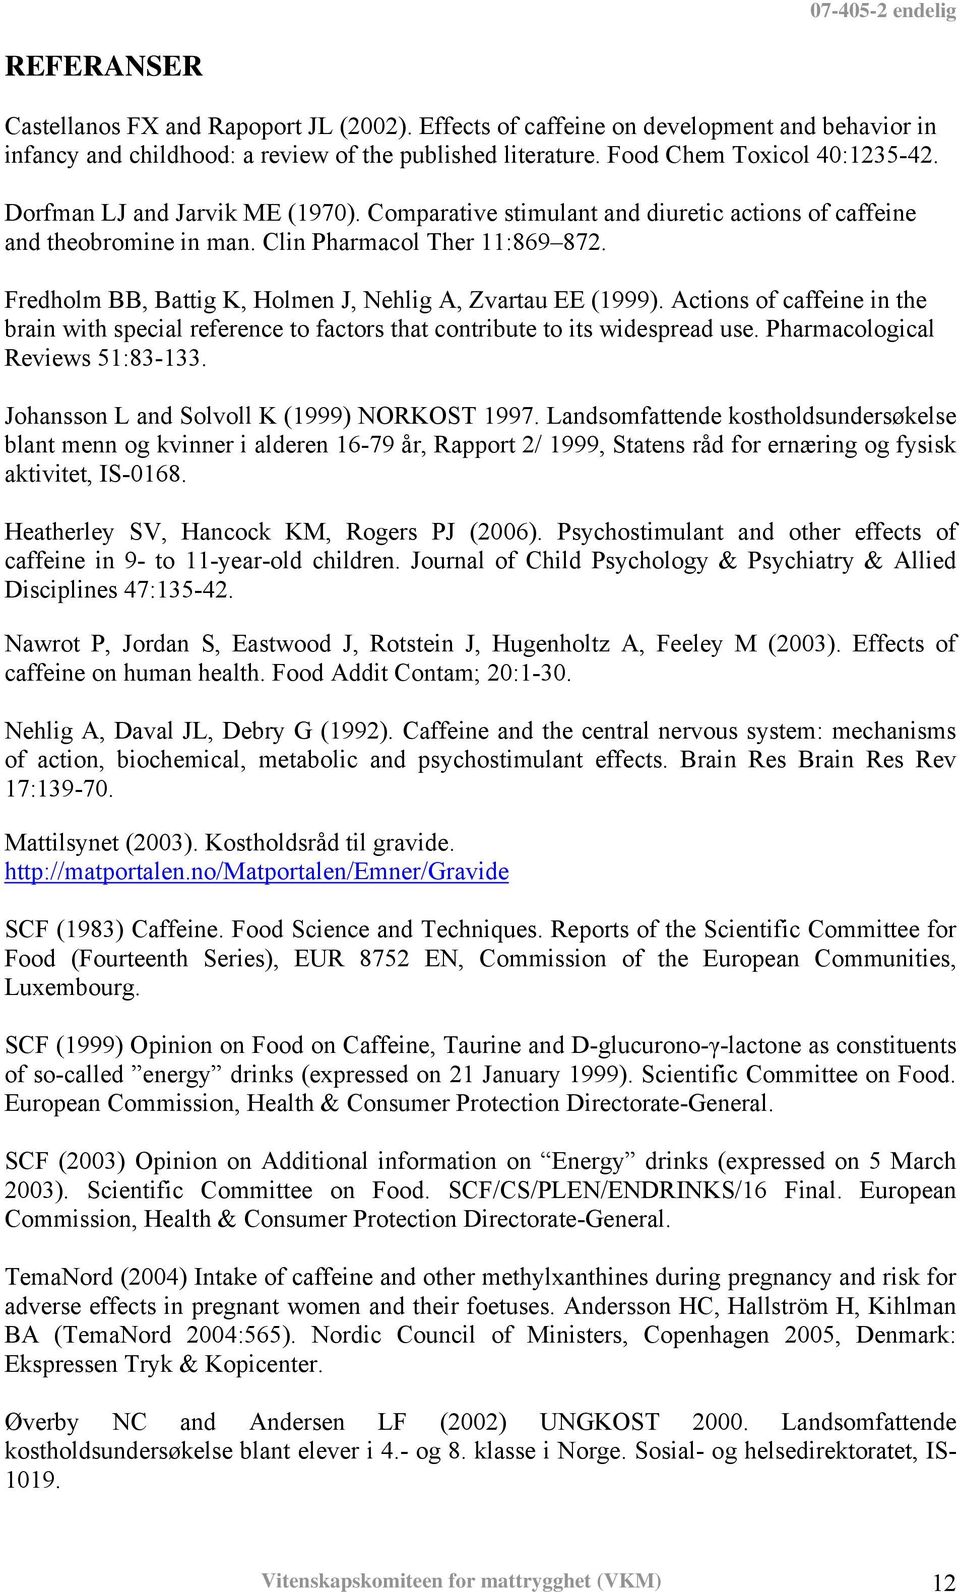 Fredholm BB, Battig K, Holmen J, Nehlig A, Zvartau EE (1999). Actions of caffeine in the brain with special reference to factors that contribute to its widespread use.